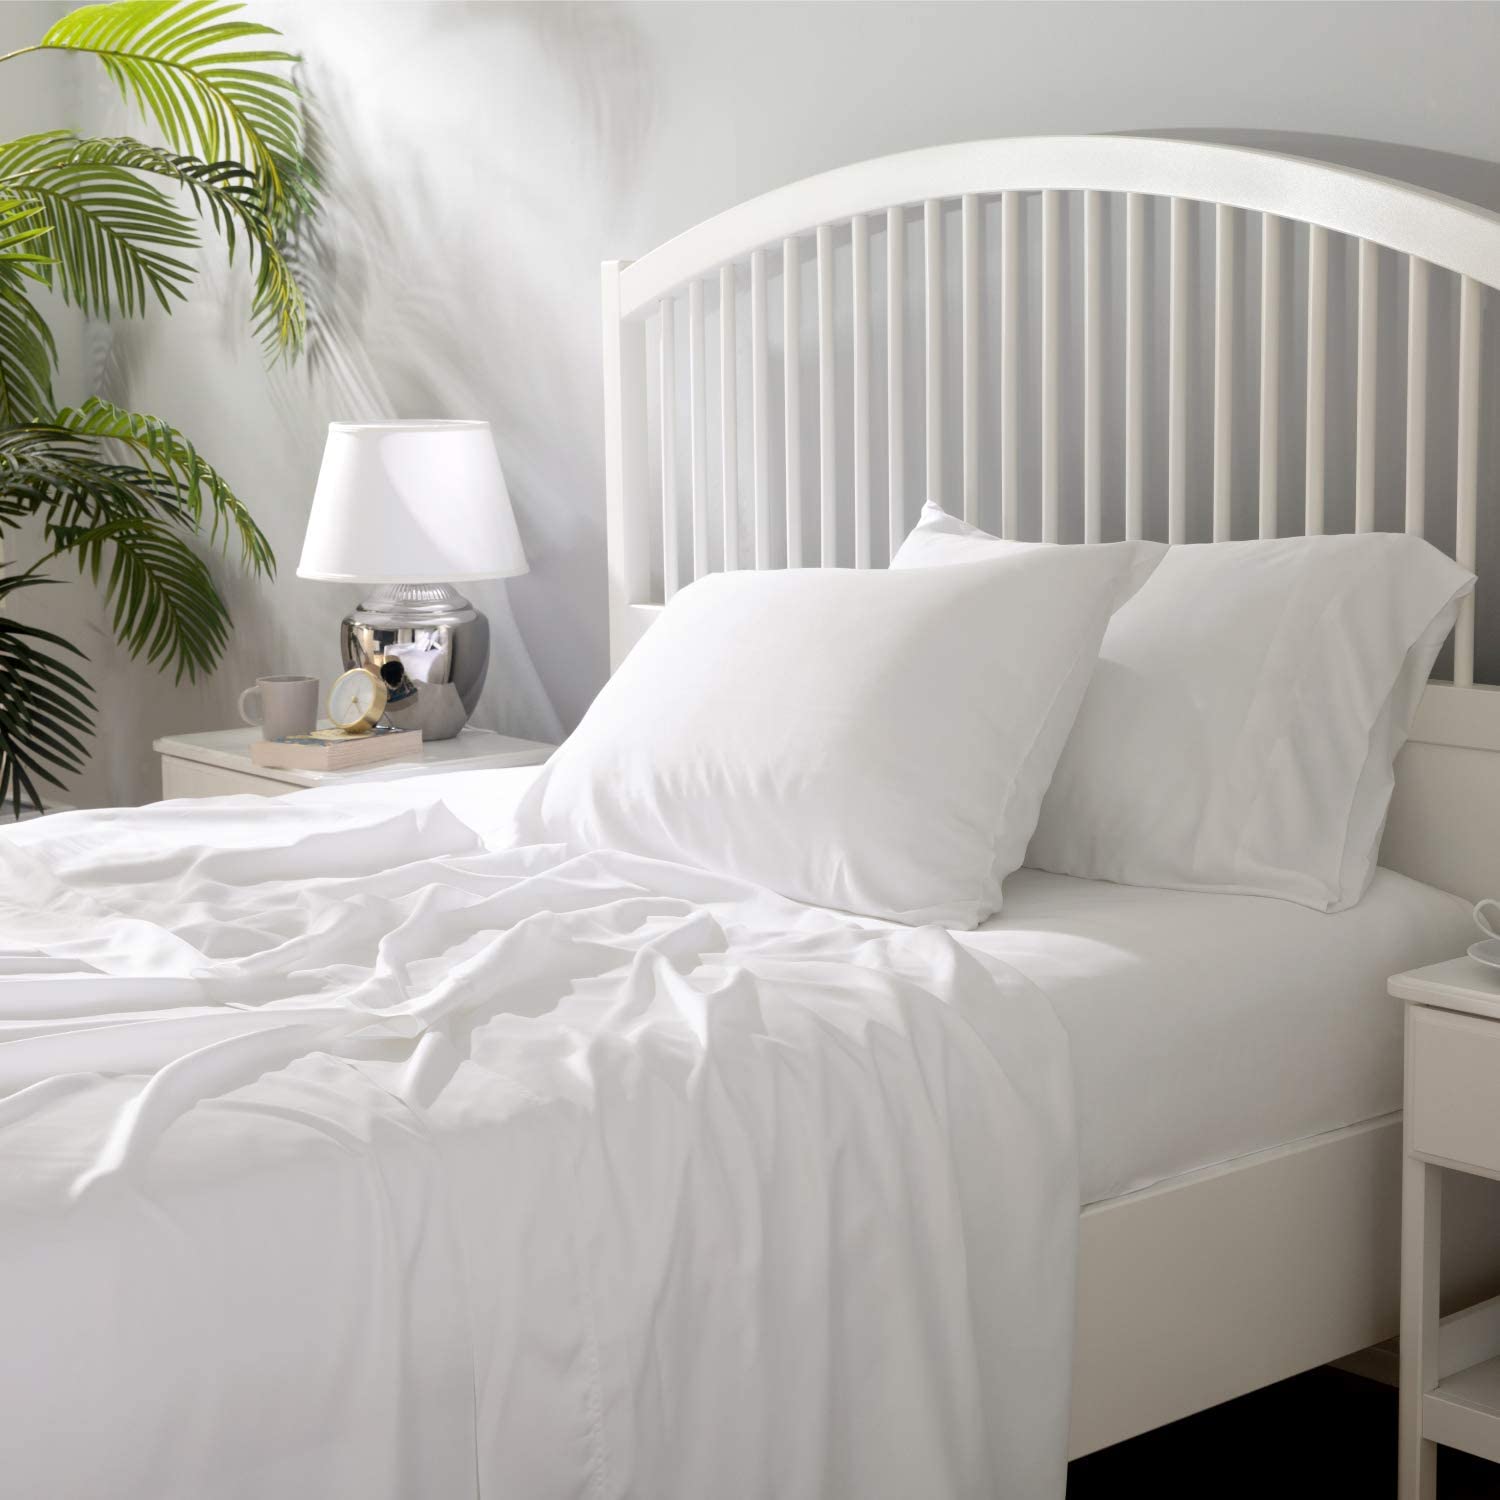 White Bamboo Sheets on Bed